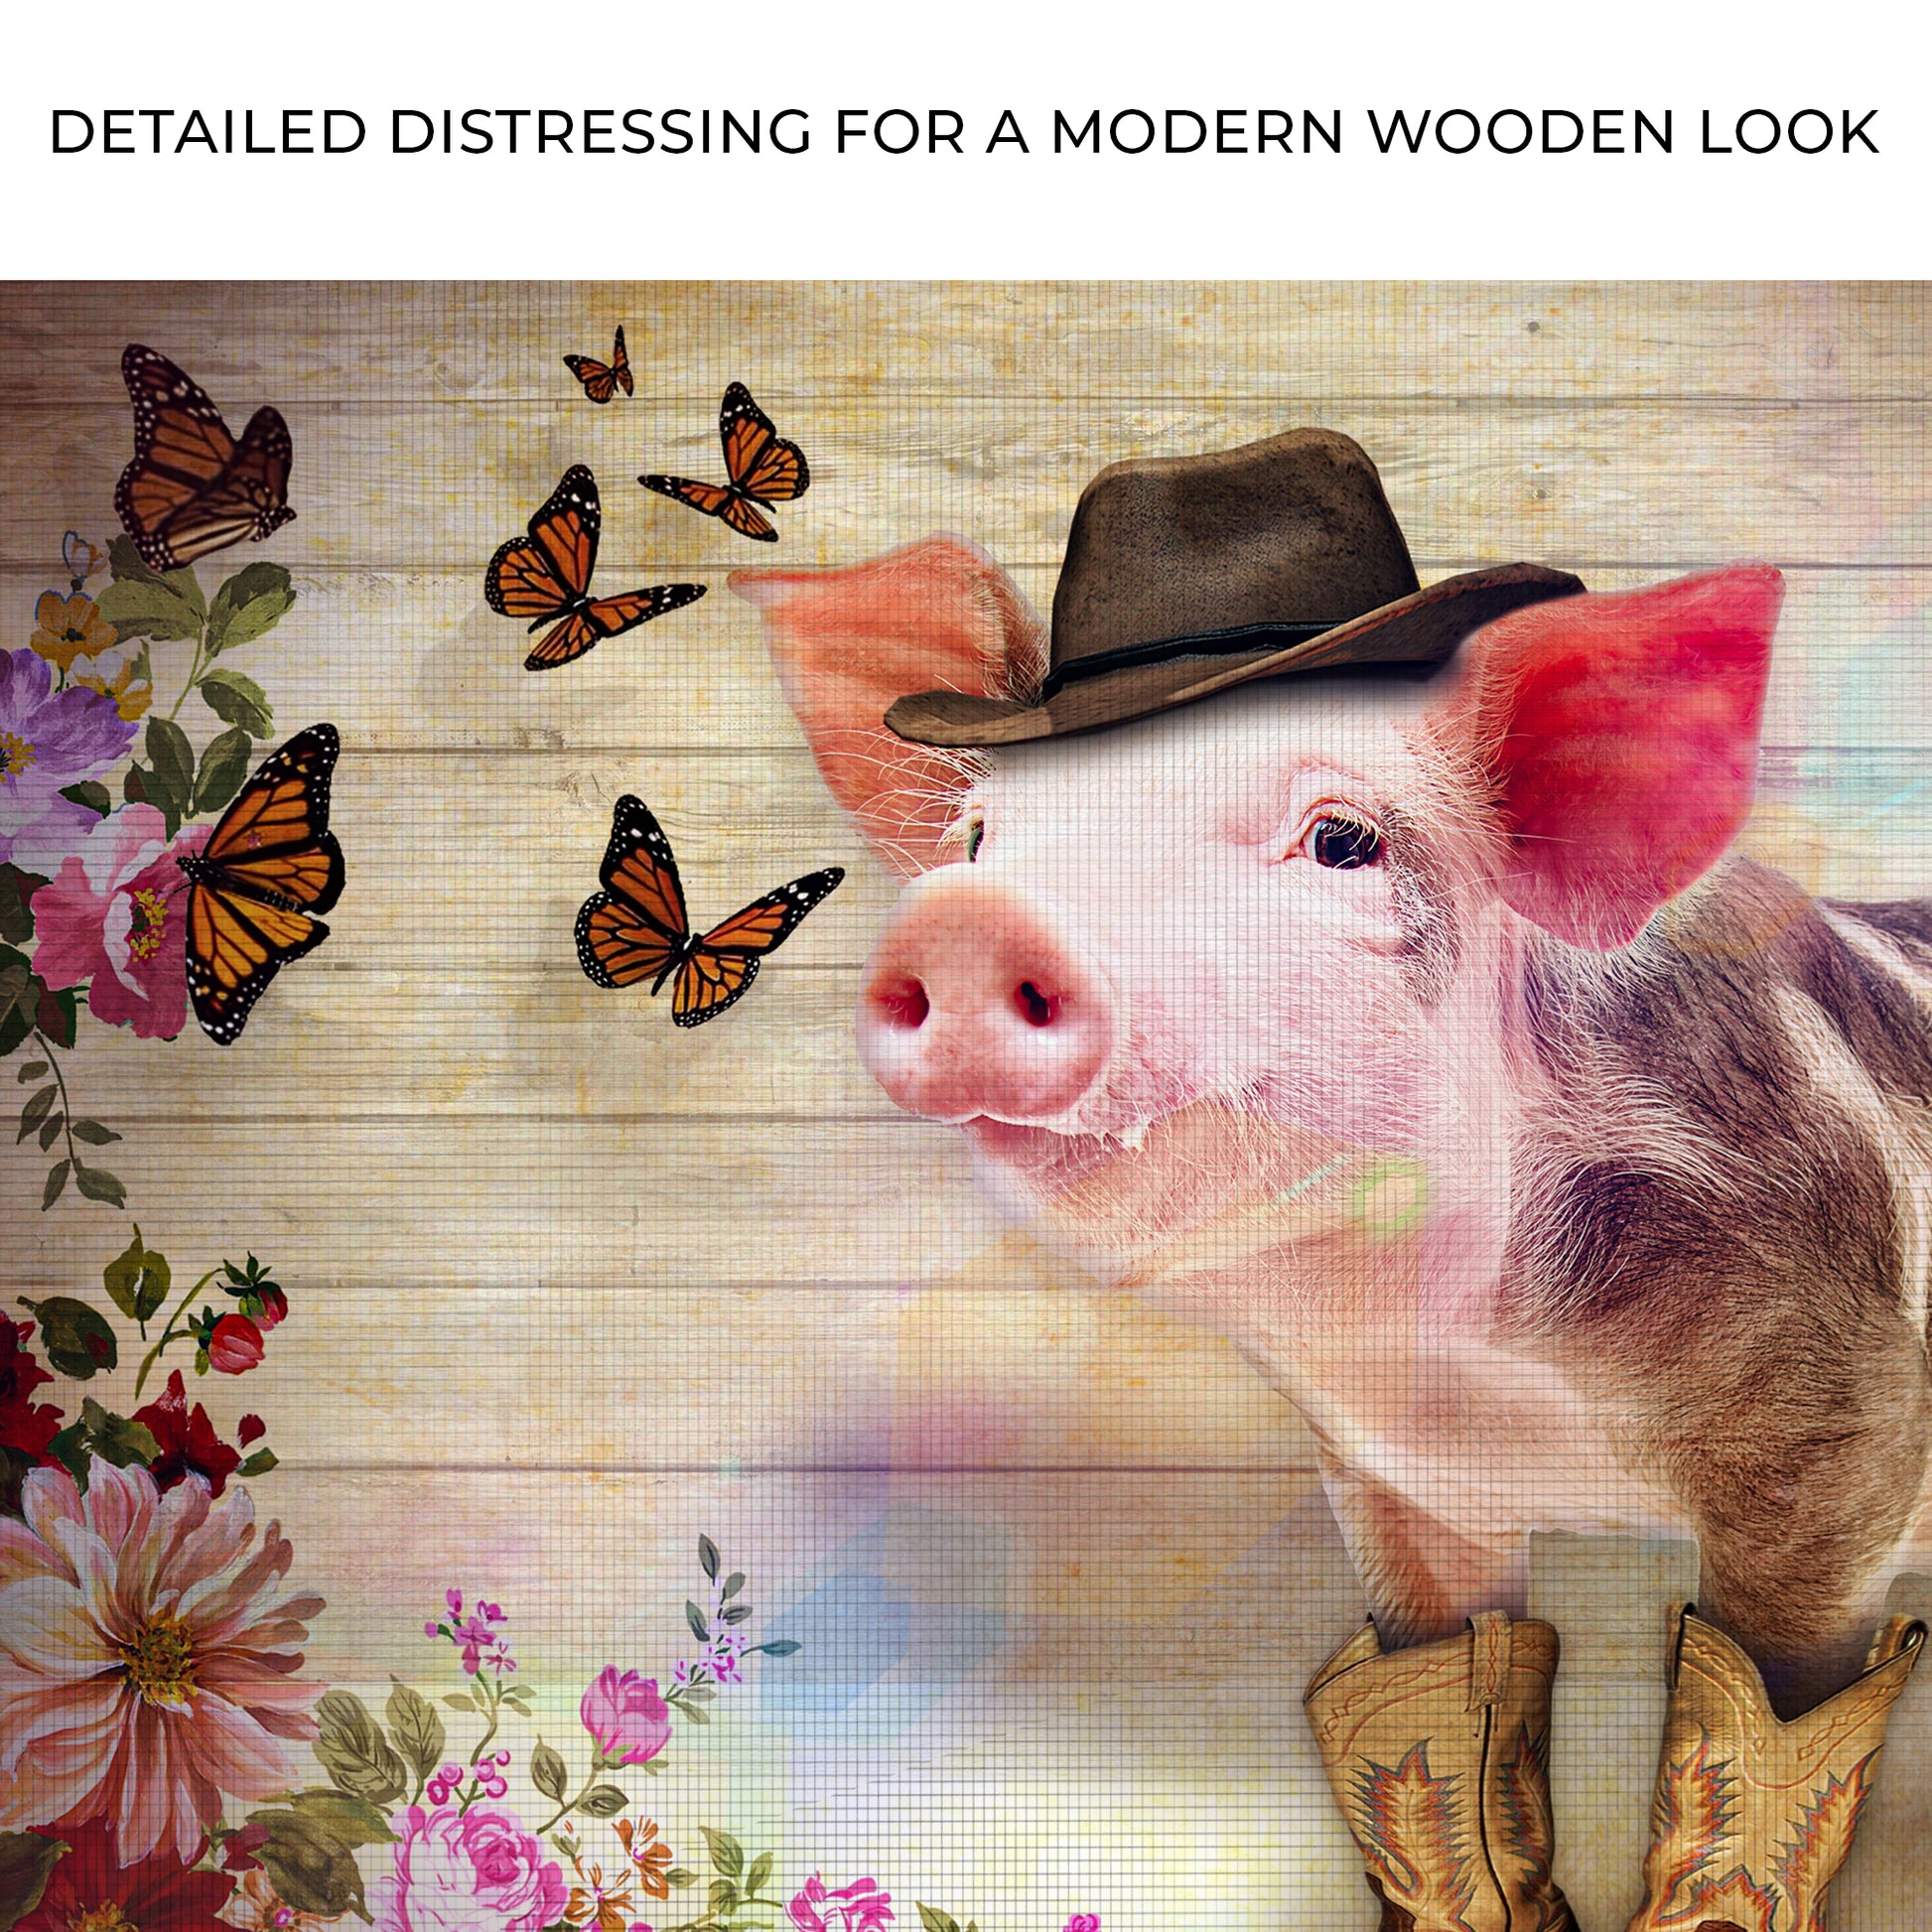 Cowboy Pig And Butterflies Canvas Wall Art Zoom - Image by Tailored Canvases